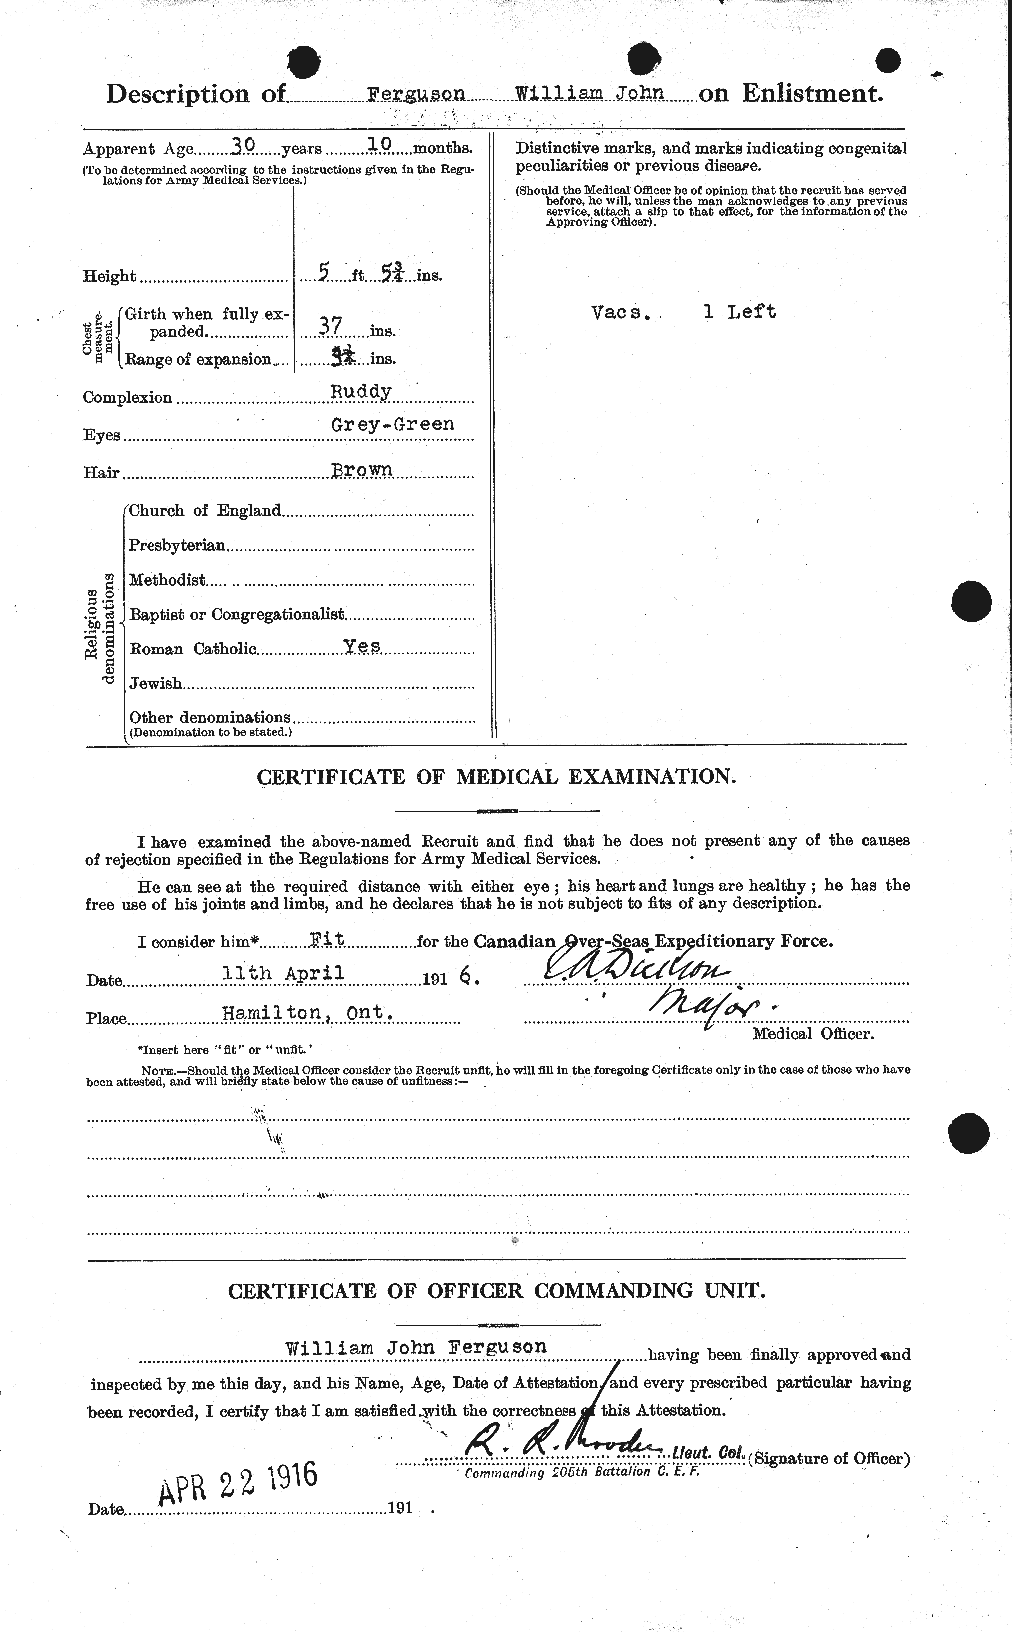 Personnel Records of the First World War - CEF 322119b